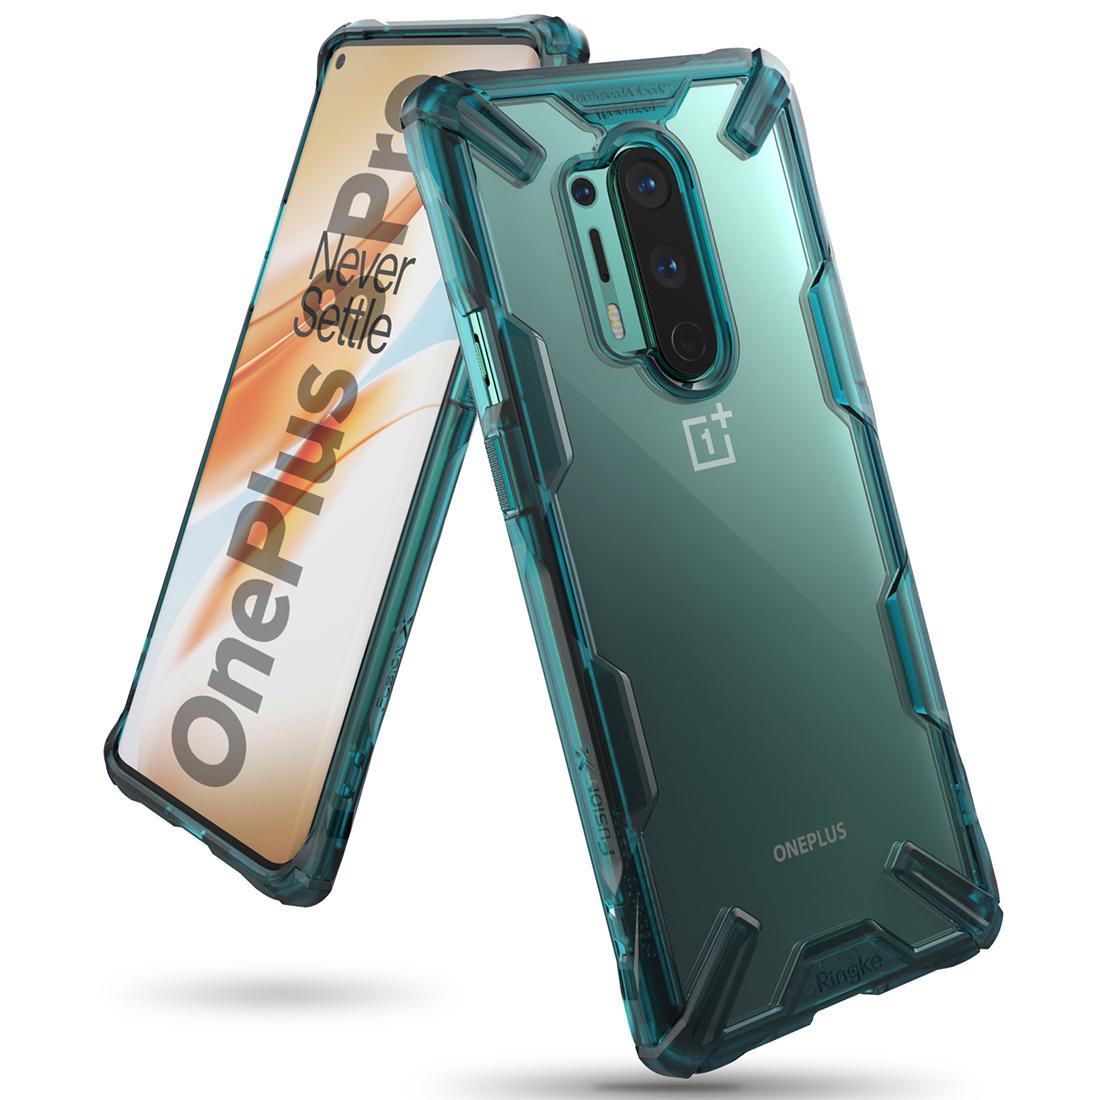 Ringke Cover for OnePlus 8 Pro Case Hard Fusion-X Ergonomic Transparent Shock Absorption TPU Bumper [ Designed Case for OnePlus 8 Pro ] - Turquoise Green - Turquoise Green